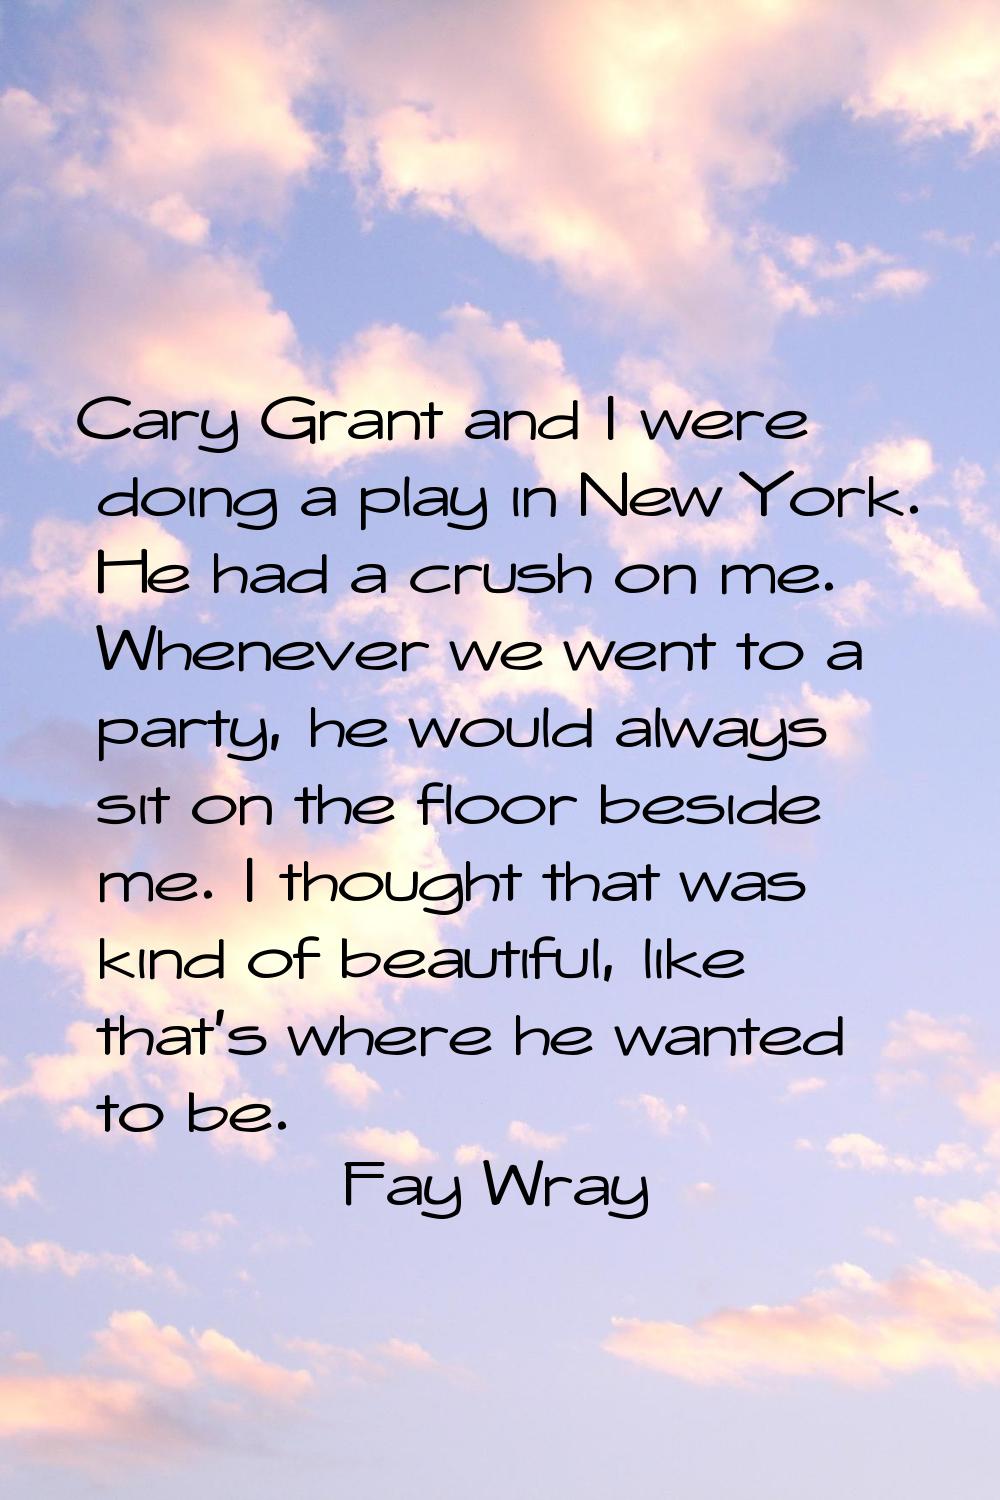 Cary Grant and I were doing a play in New York. He had a crush on me. Whenever we went to a party, 